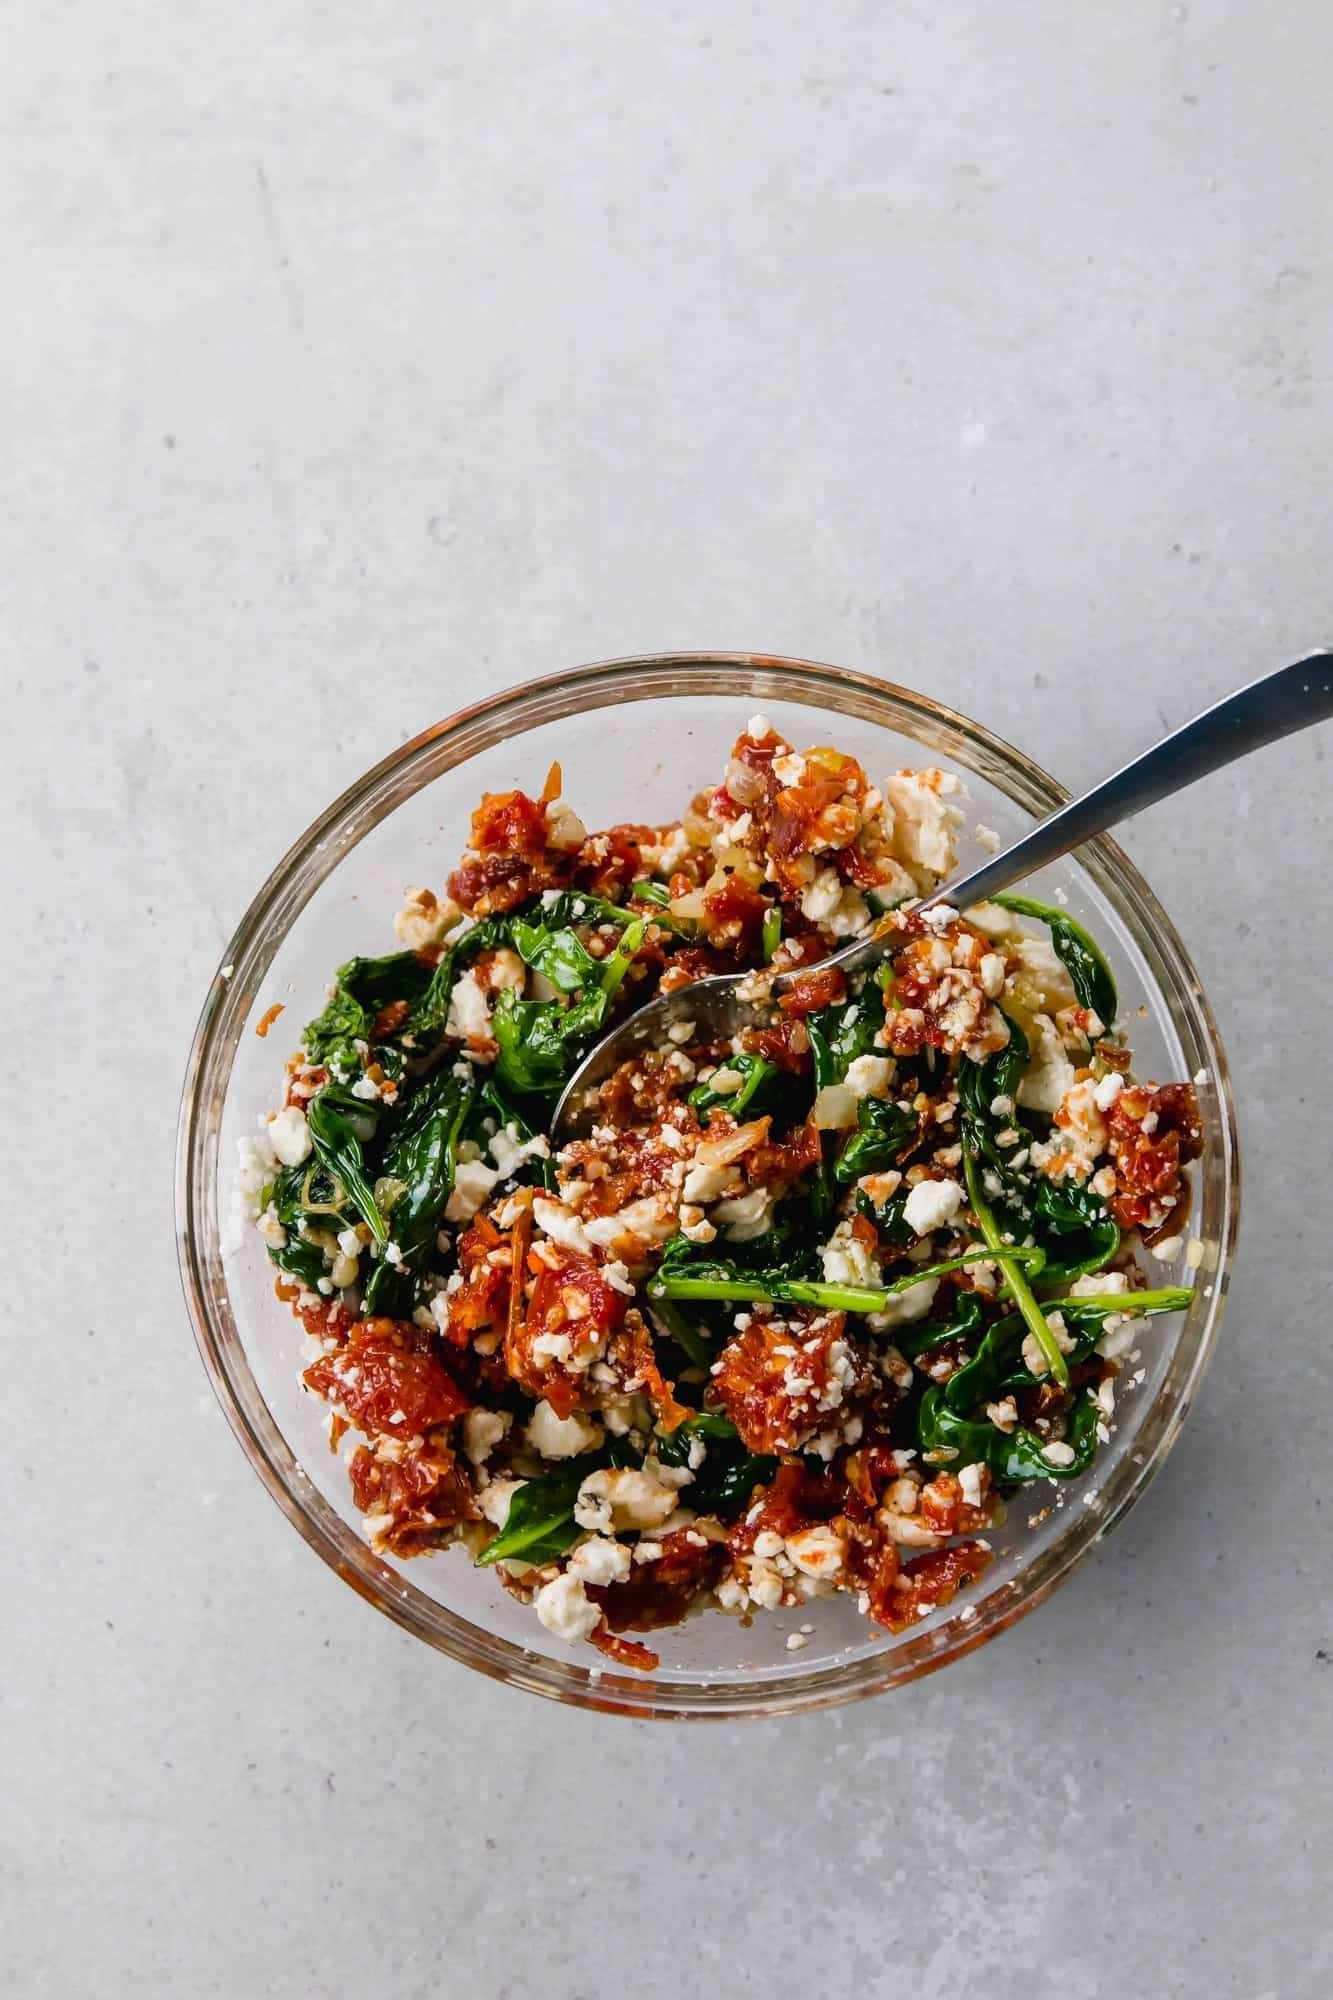 Overhead of clear glass bowl containing sundried tomato, kale and feta stuffing, with large spoon.